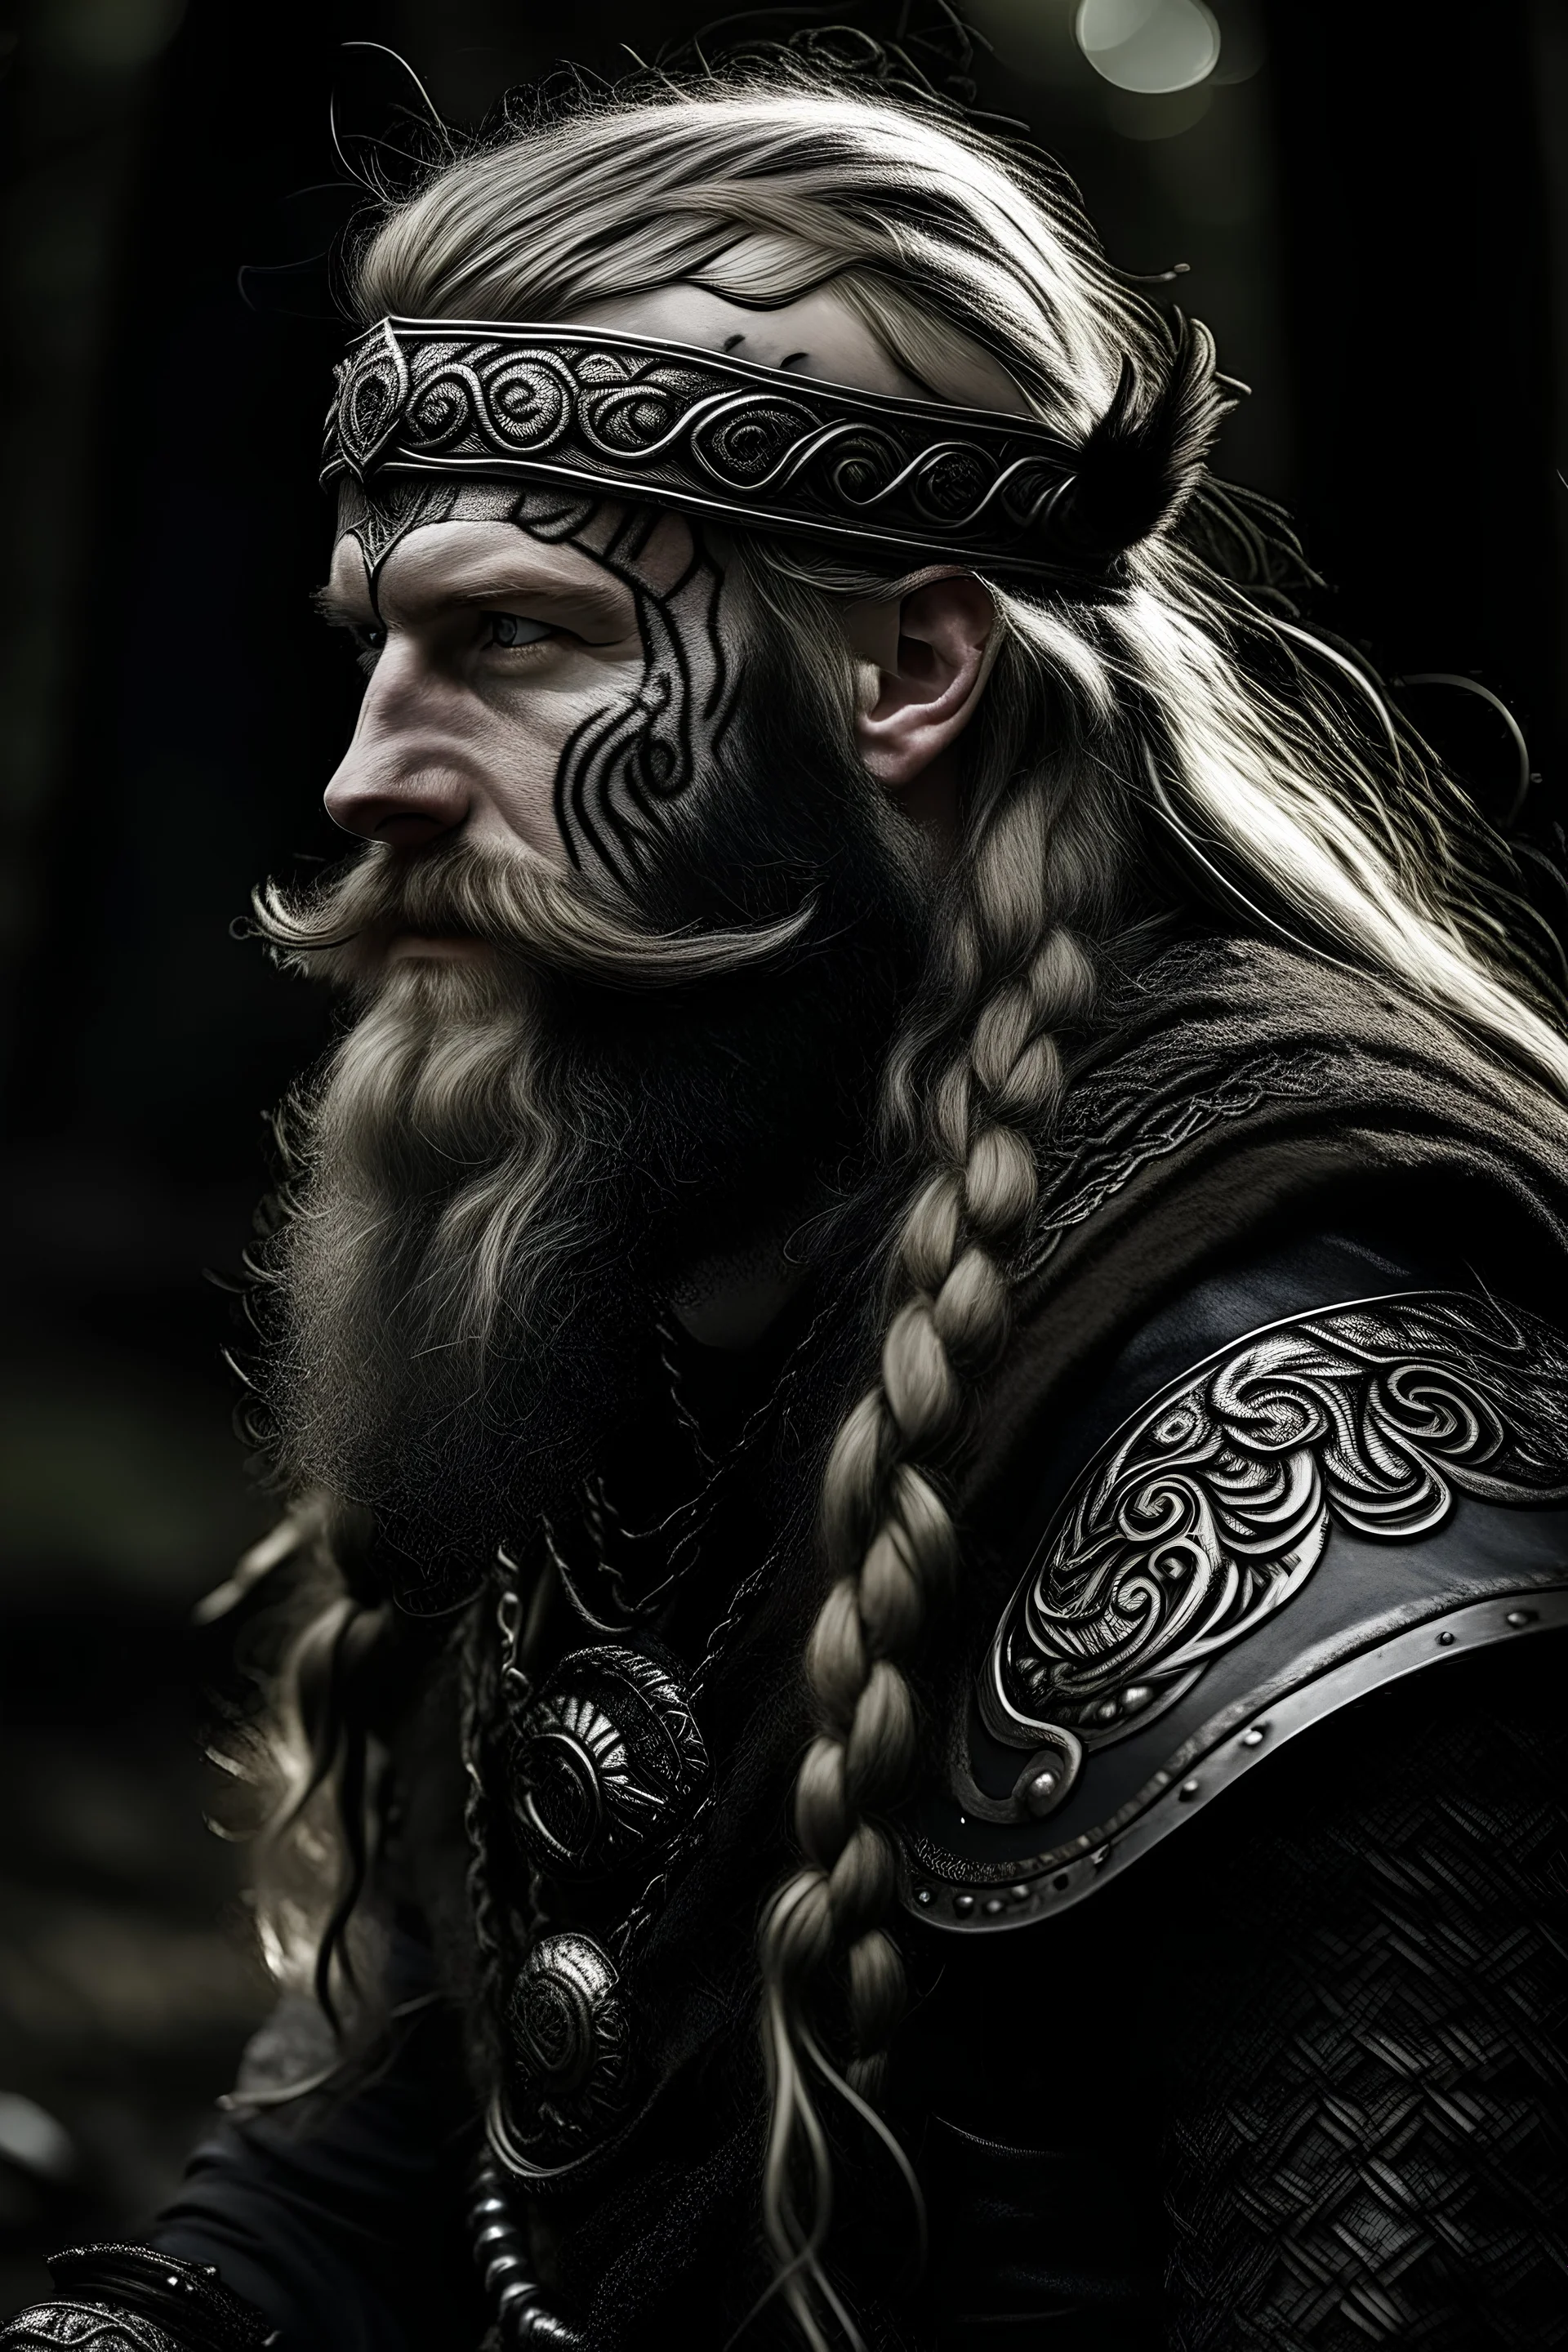 black and greybearded, armored with barbut helmet, middle aged long haired viking warrior with celtic tattoos